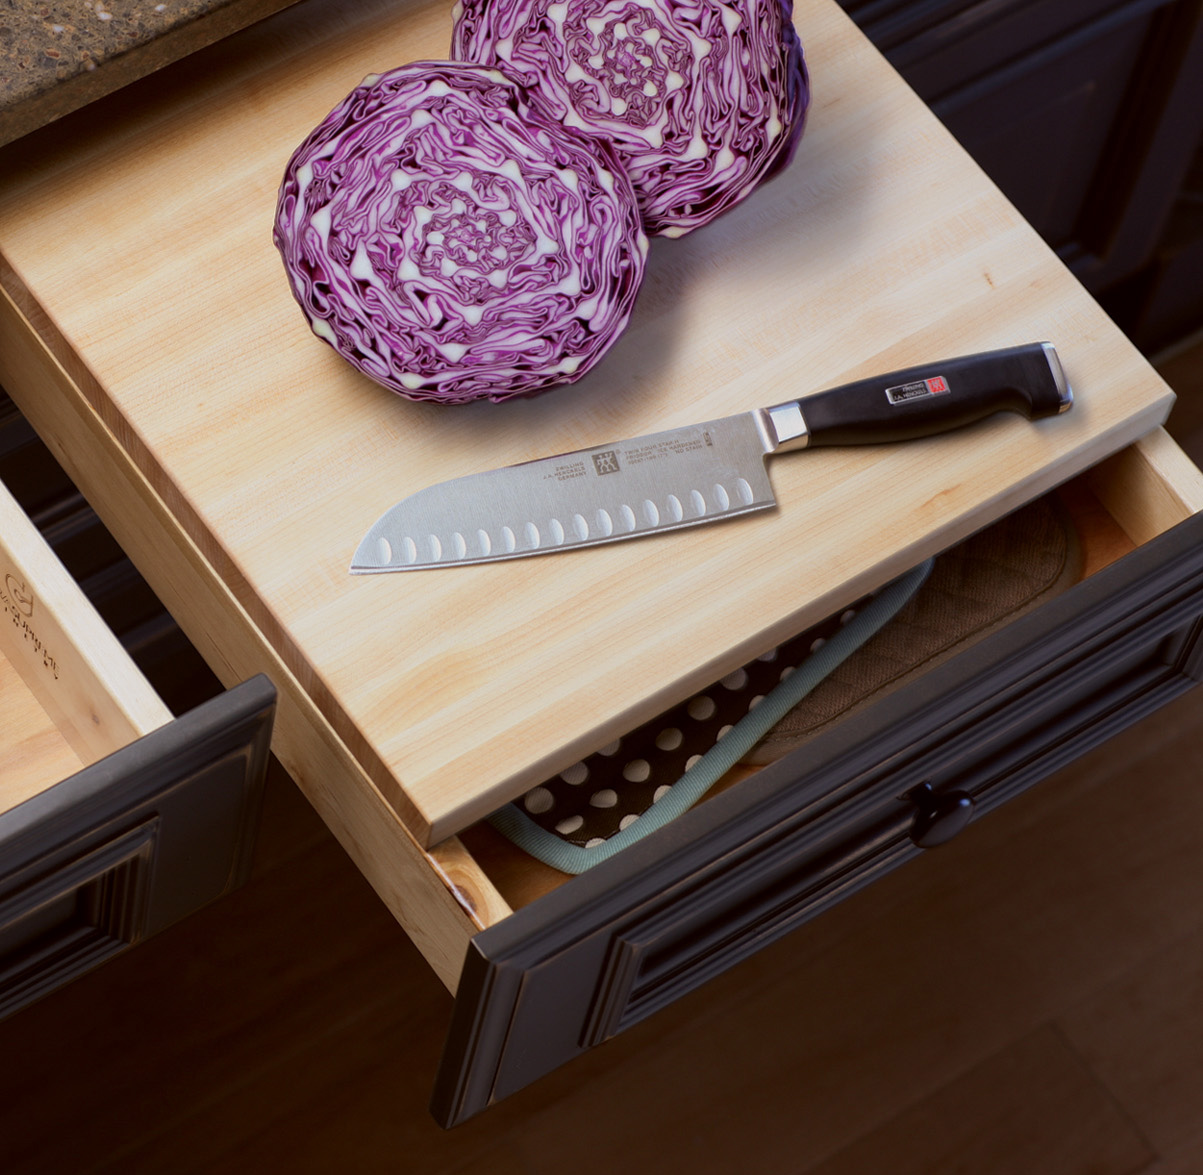 Dura Supreme Cabinetry's removable chop block within a drawer, adds cutting board storage space beneath the countertop to add function to the food prep area.